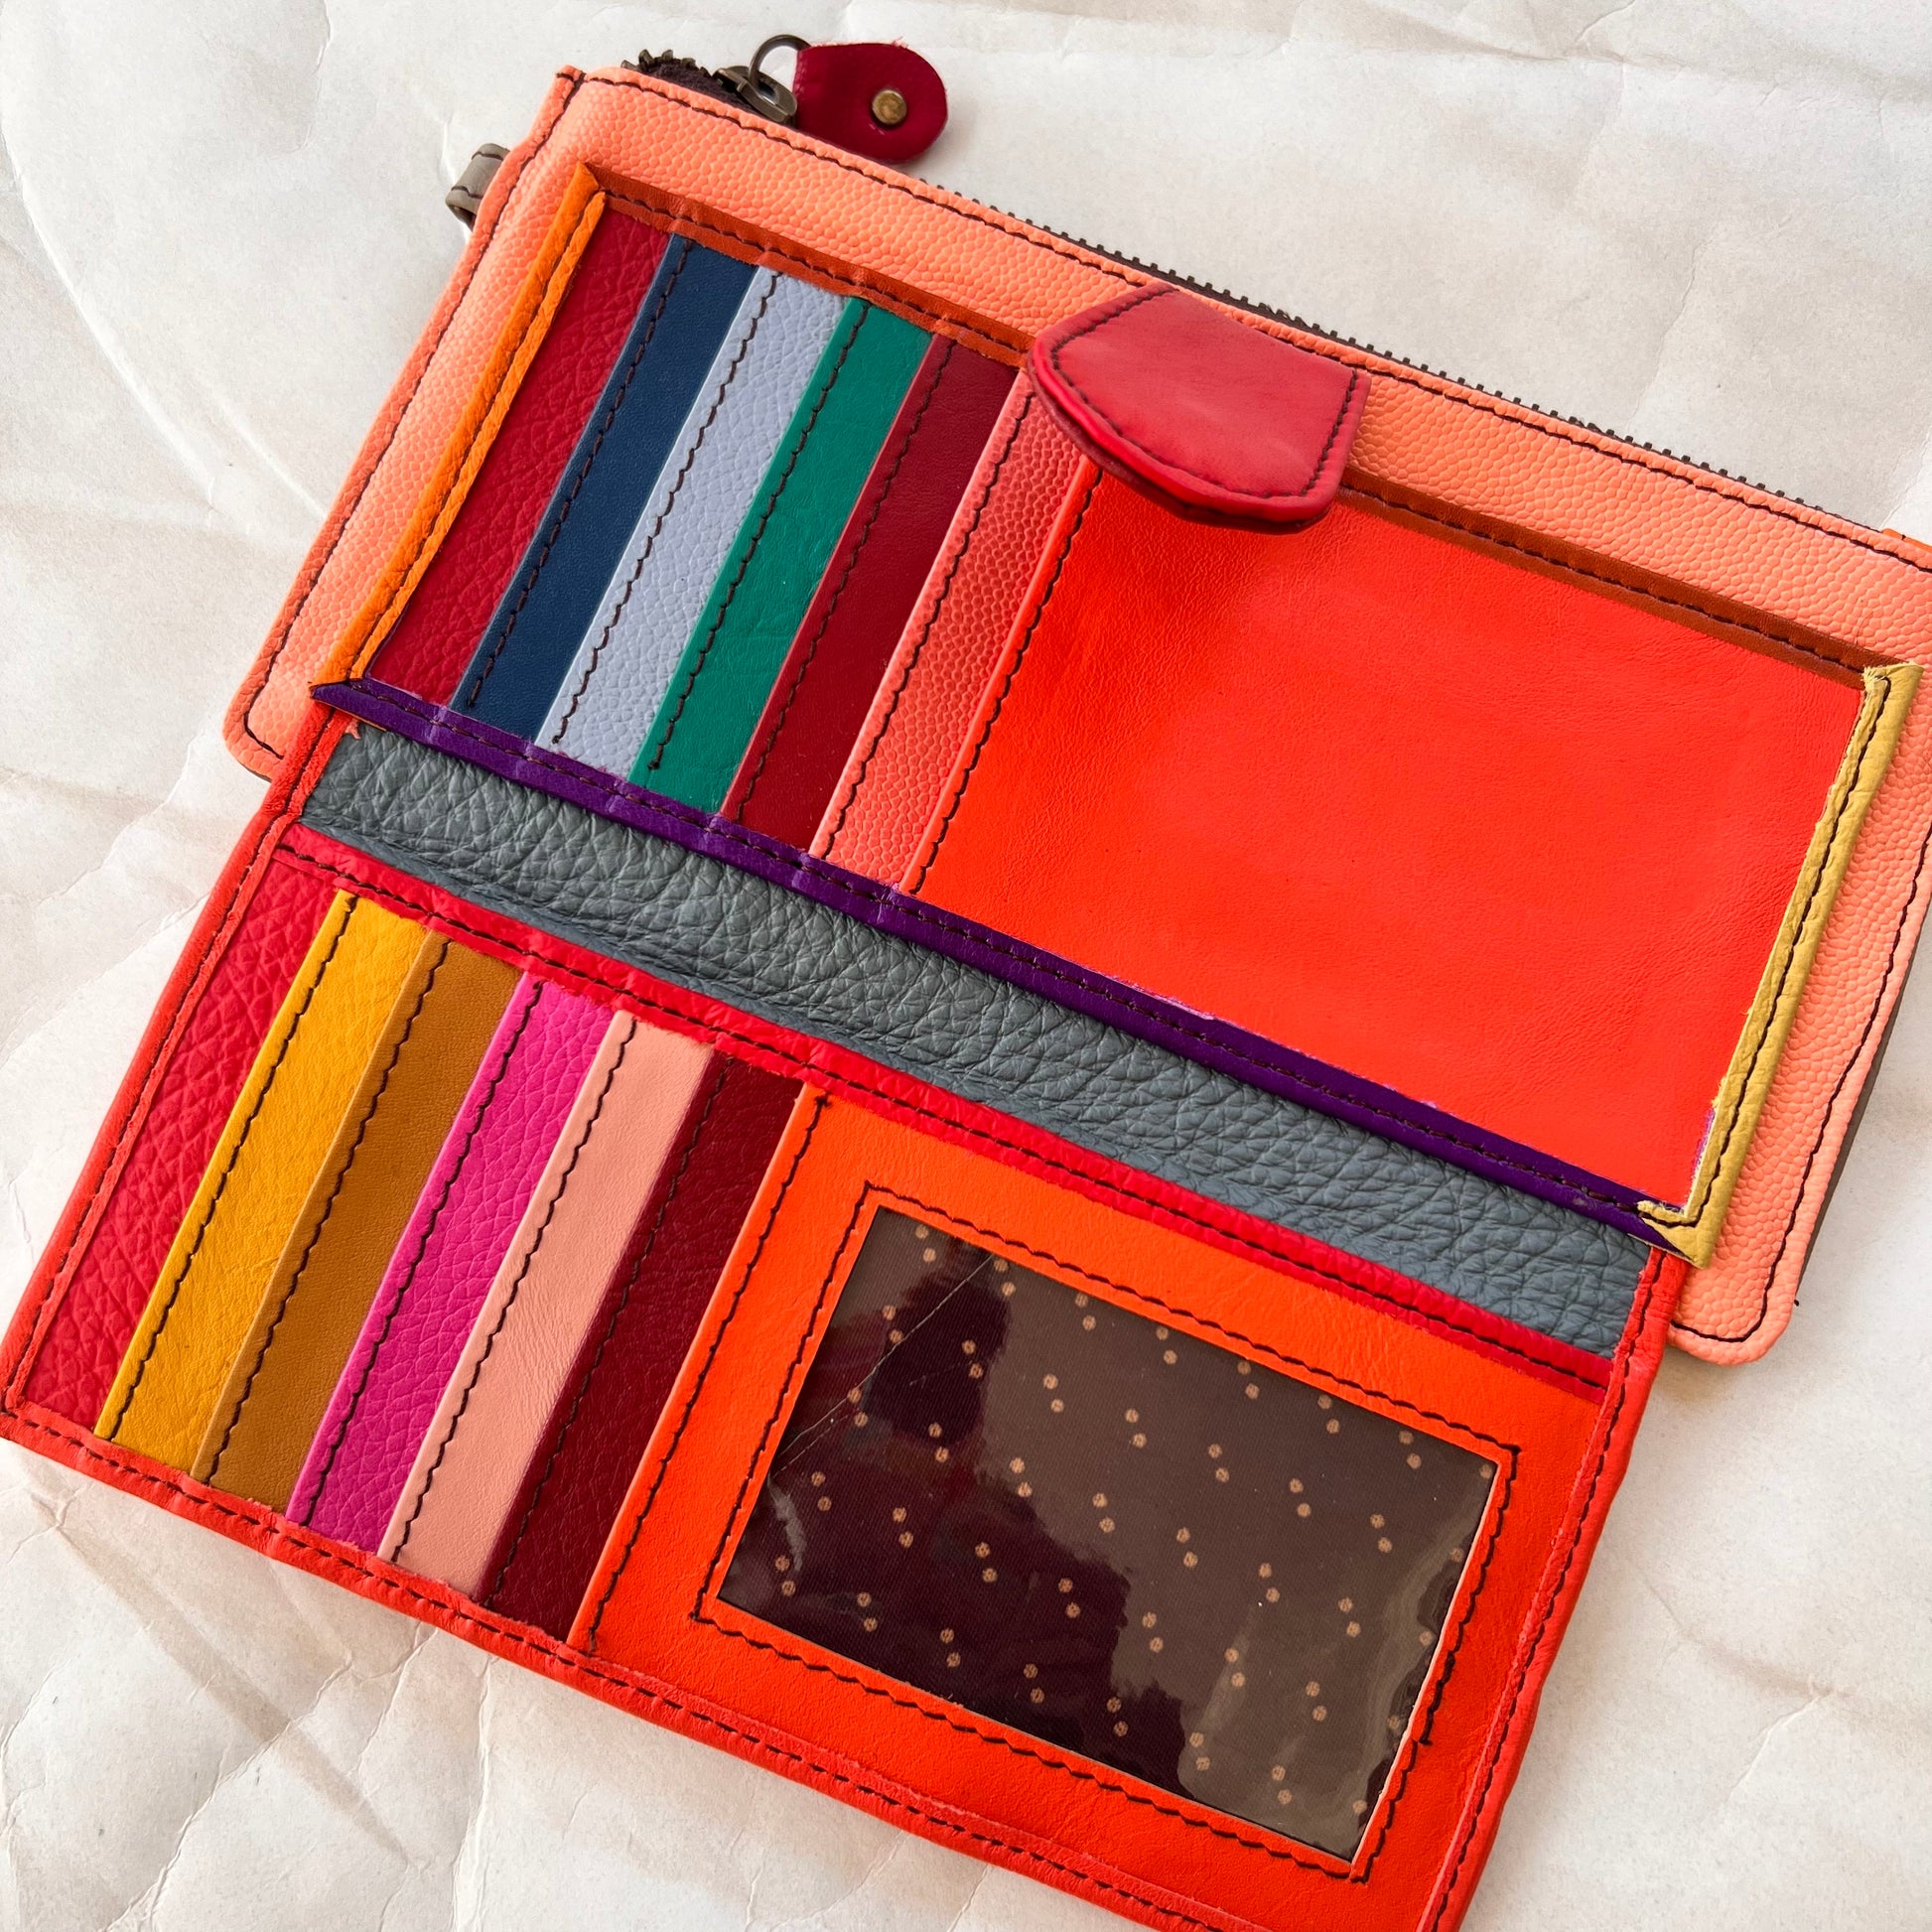 interior view of kimber wallet showing colorful card slots, pockets, and clear spot for ID.